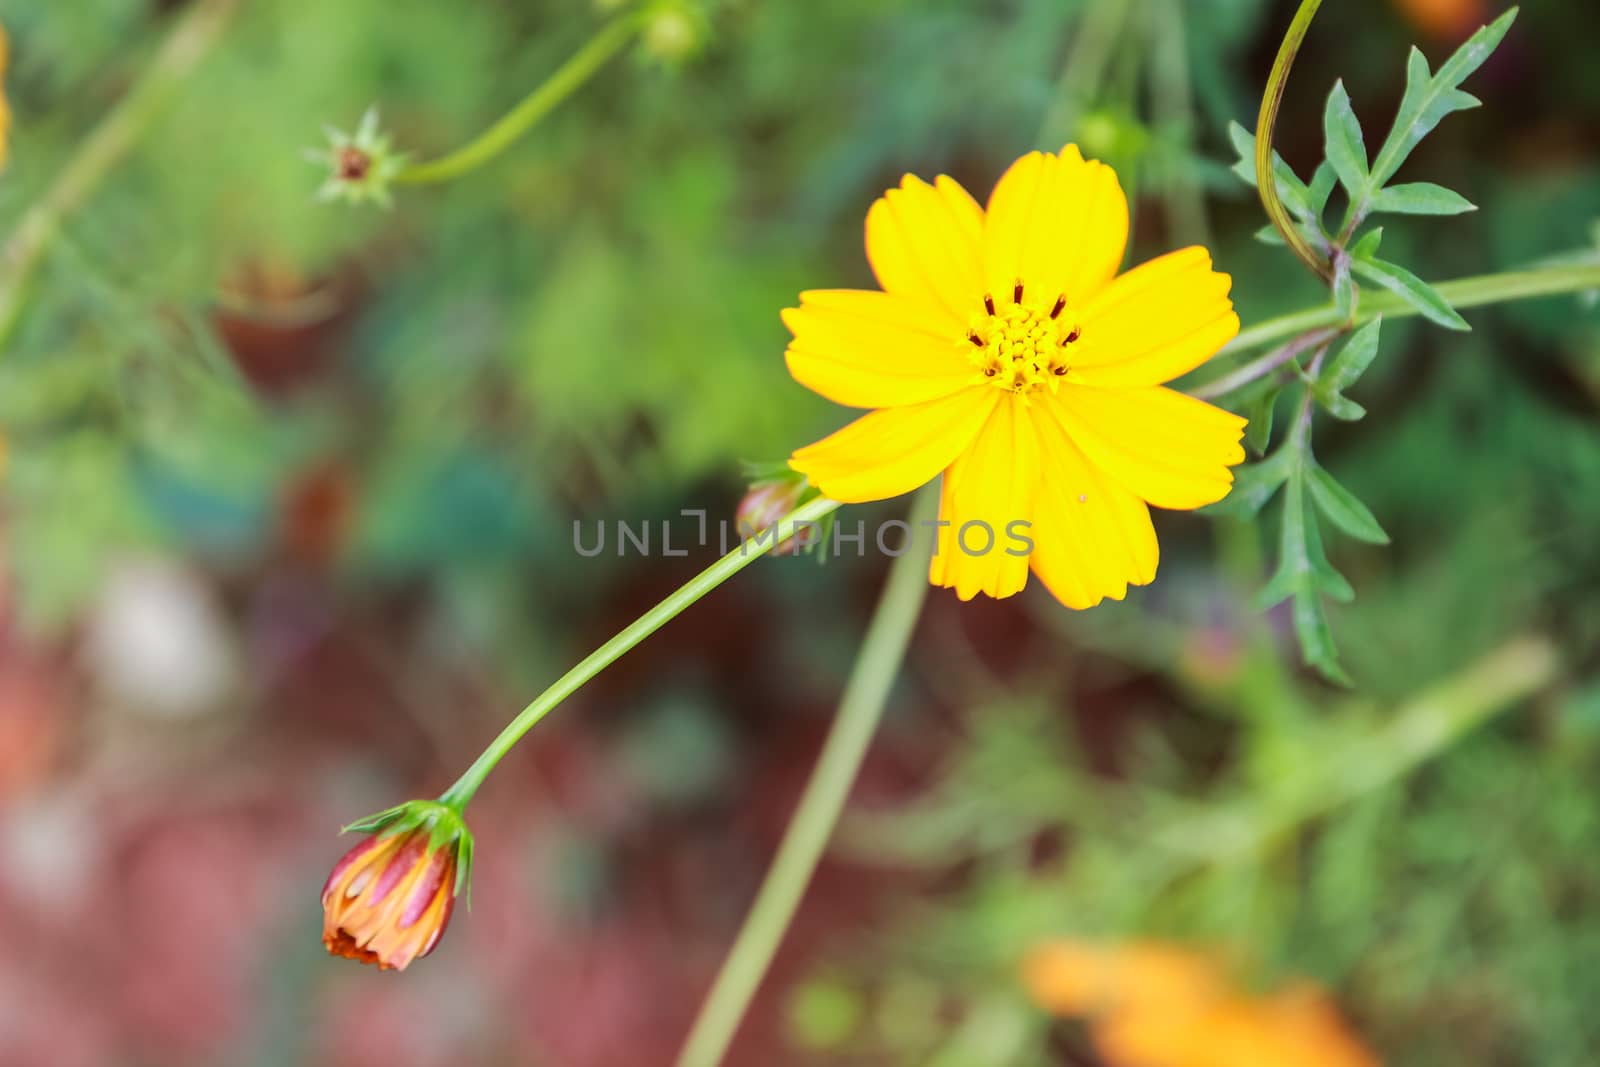 Colorful cosmos flower blooming in the field, Soft focus.